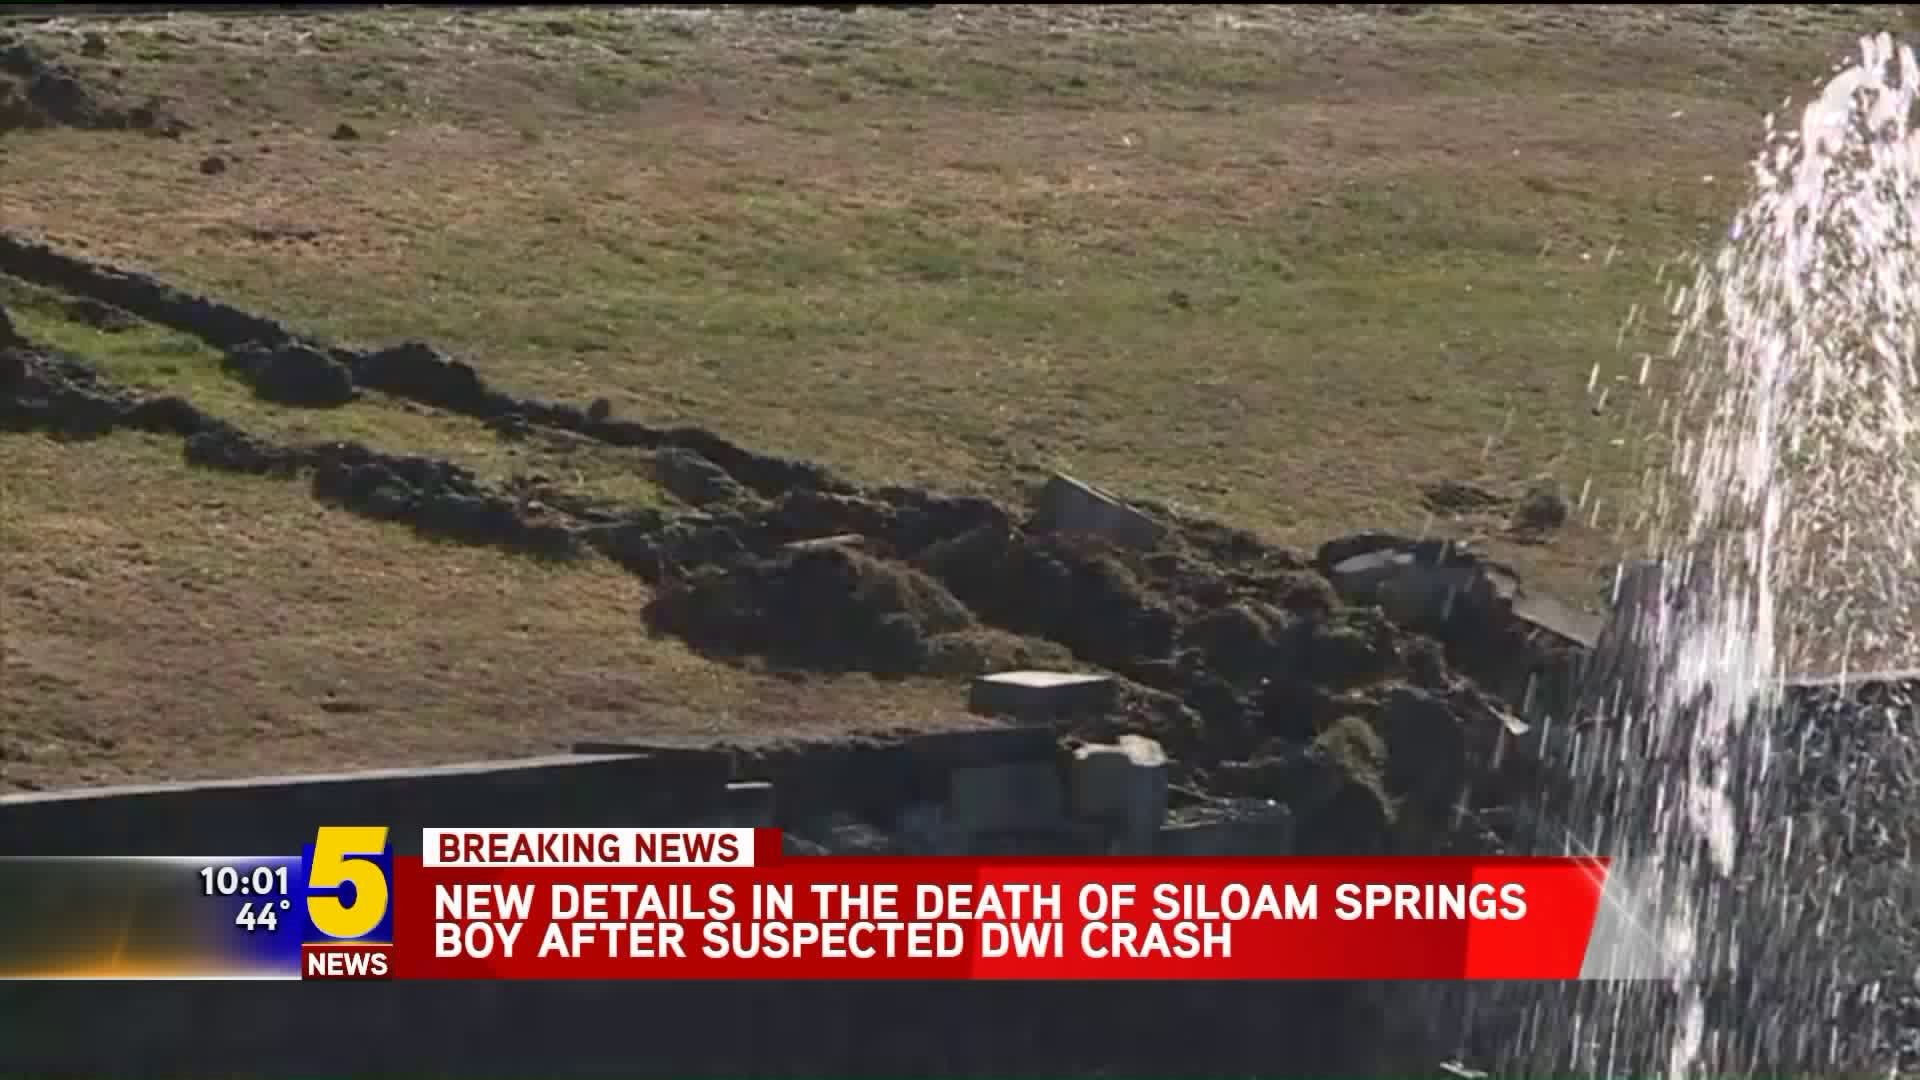 New details in the death of siloam springs boy after suspected DWI crash